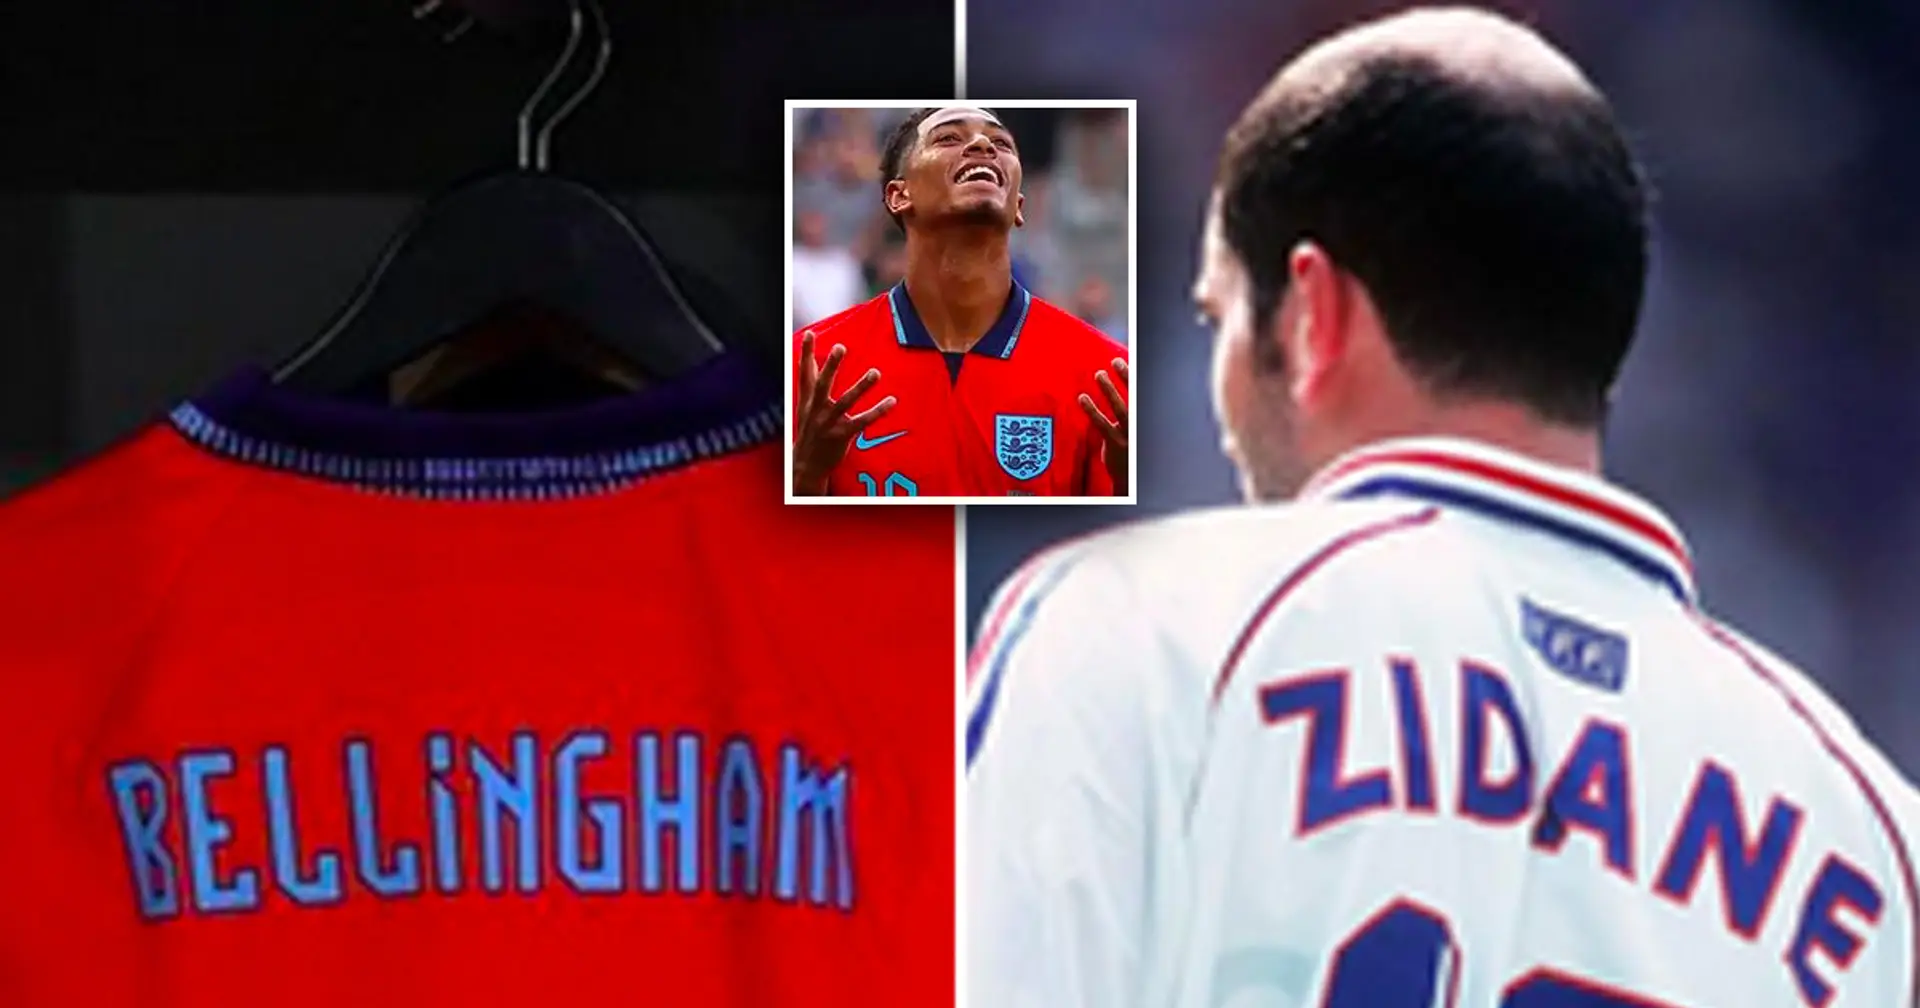 Bellingham's England jersey number spotted – makes Zidane comparison even more on point